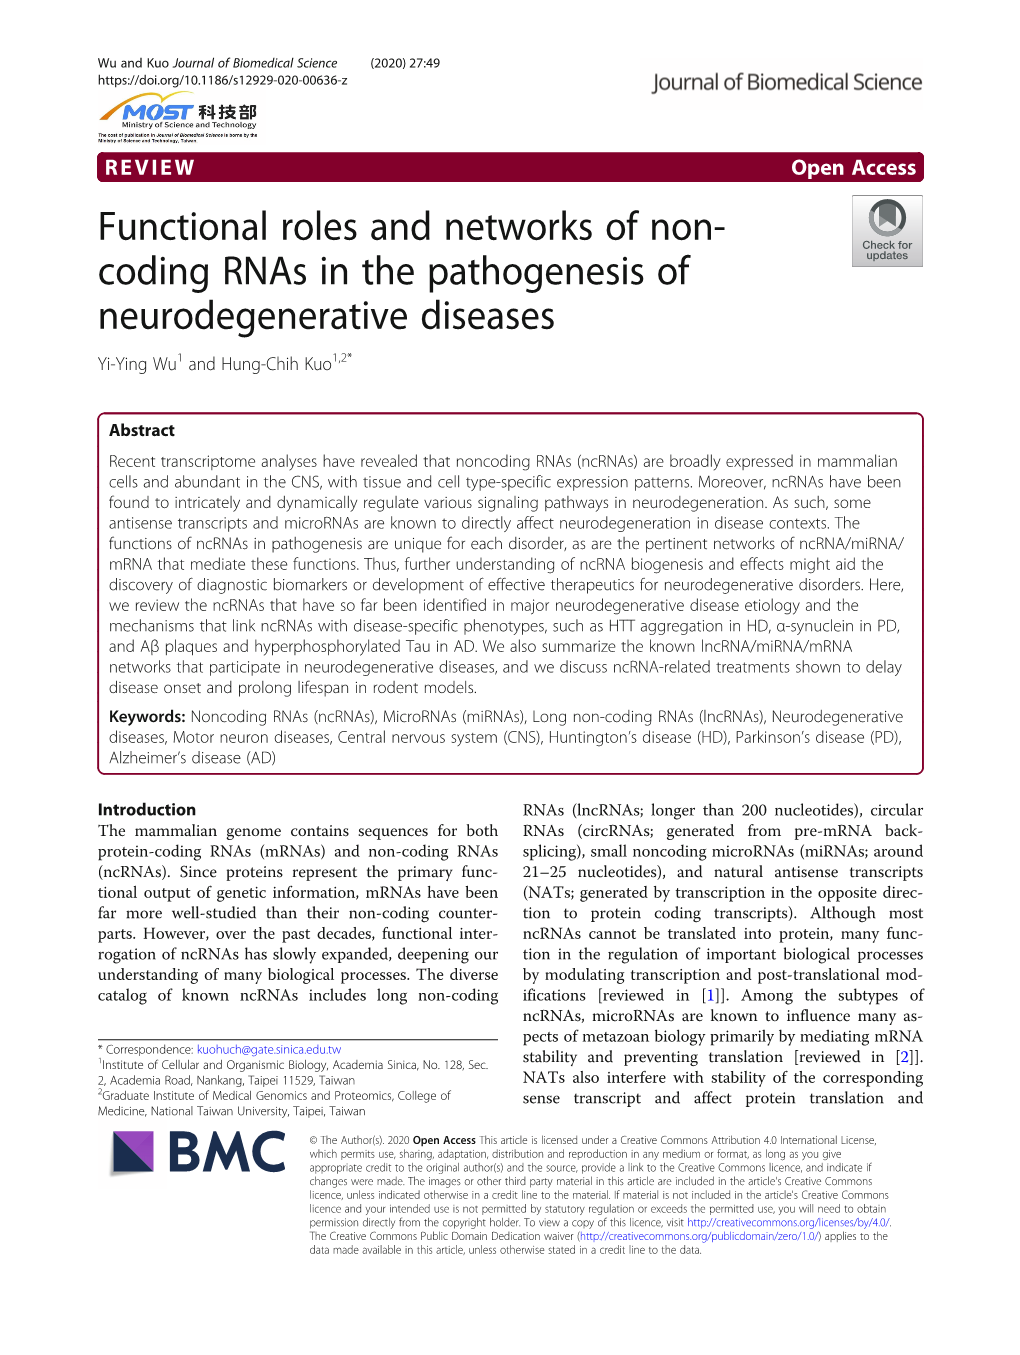 Functional Roles and Networks of Non-Coding Rnas in The